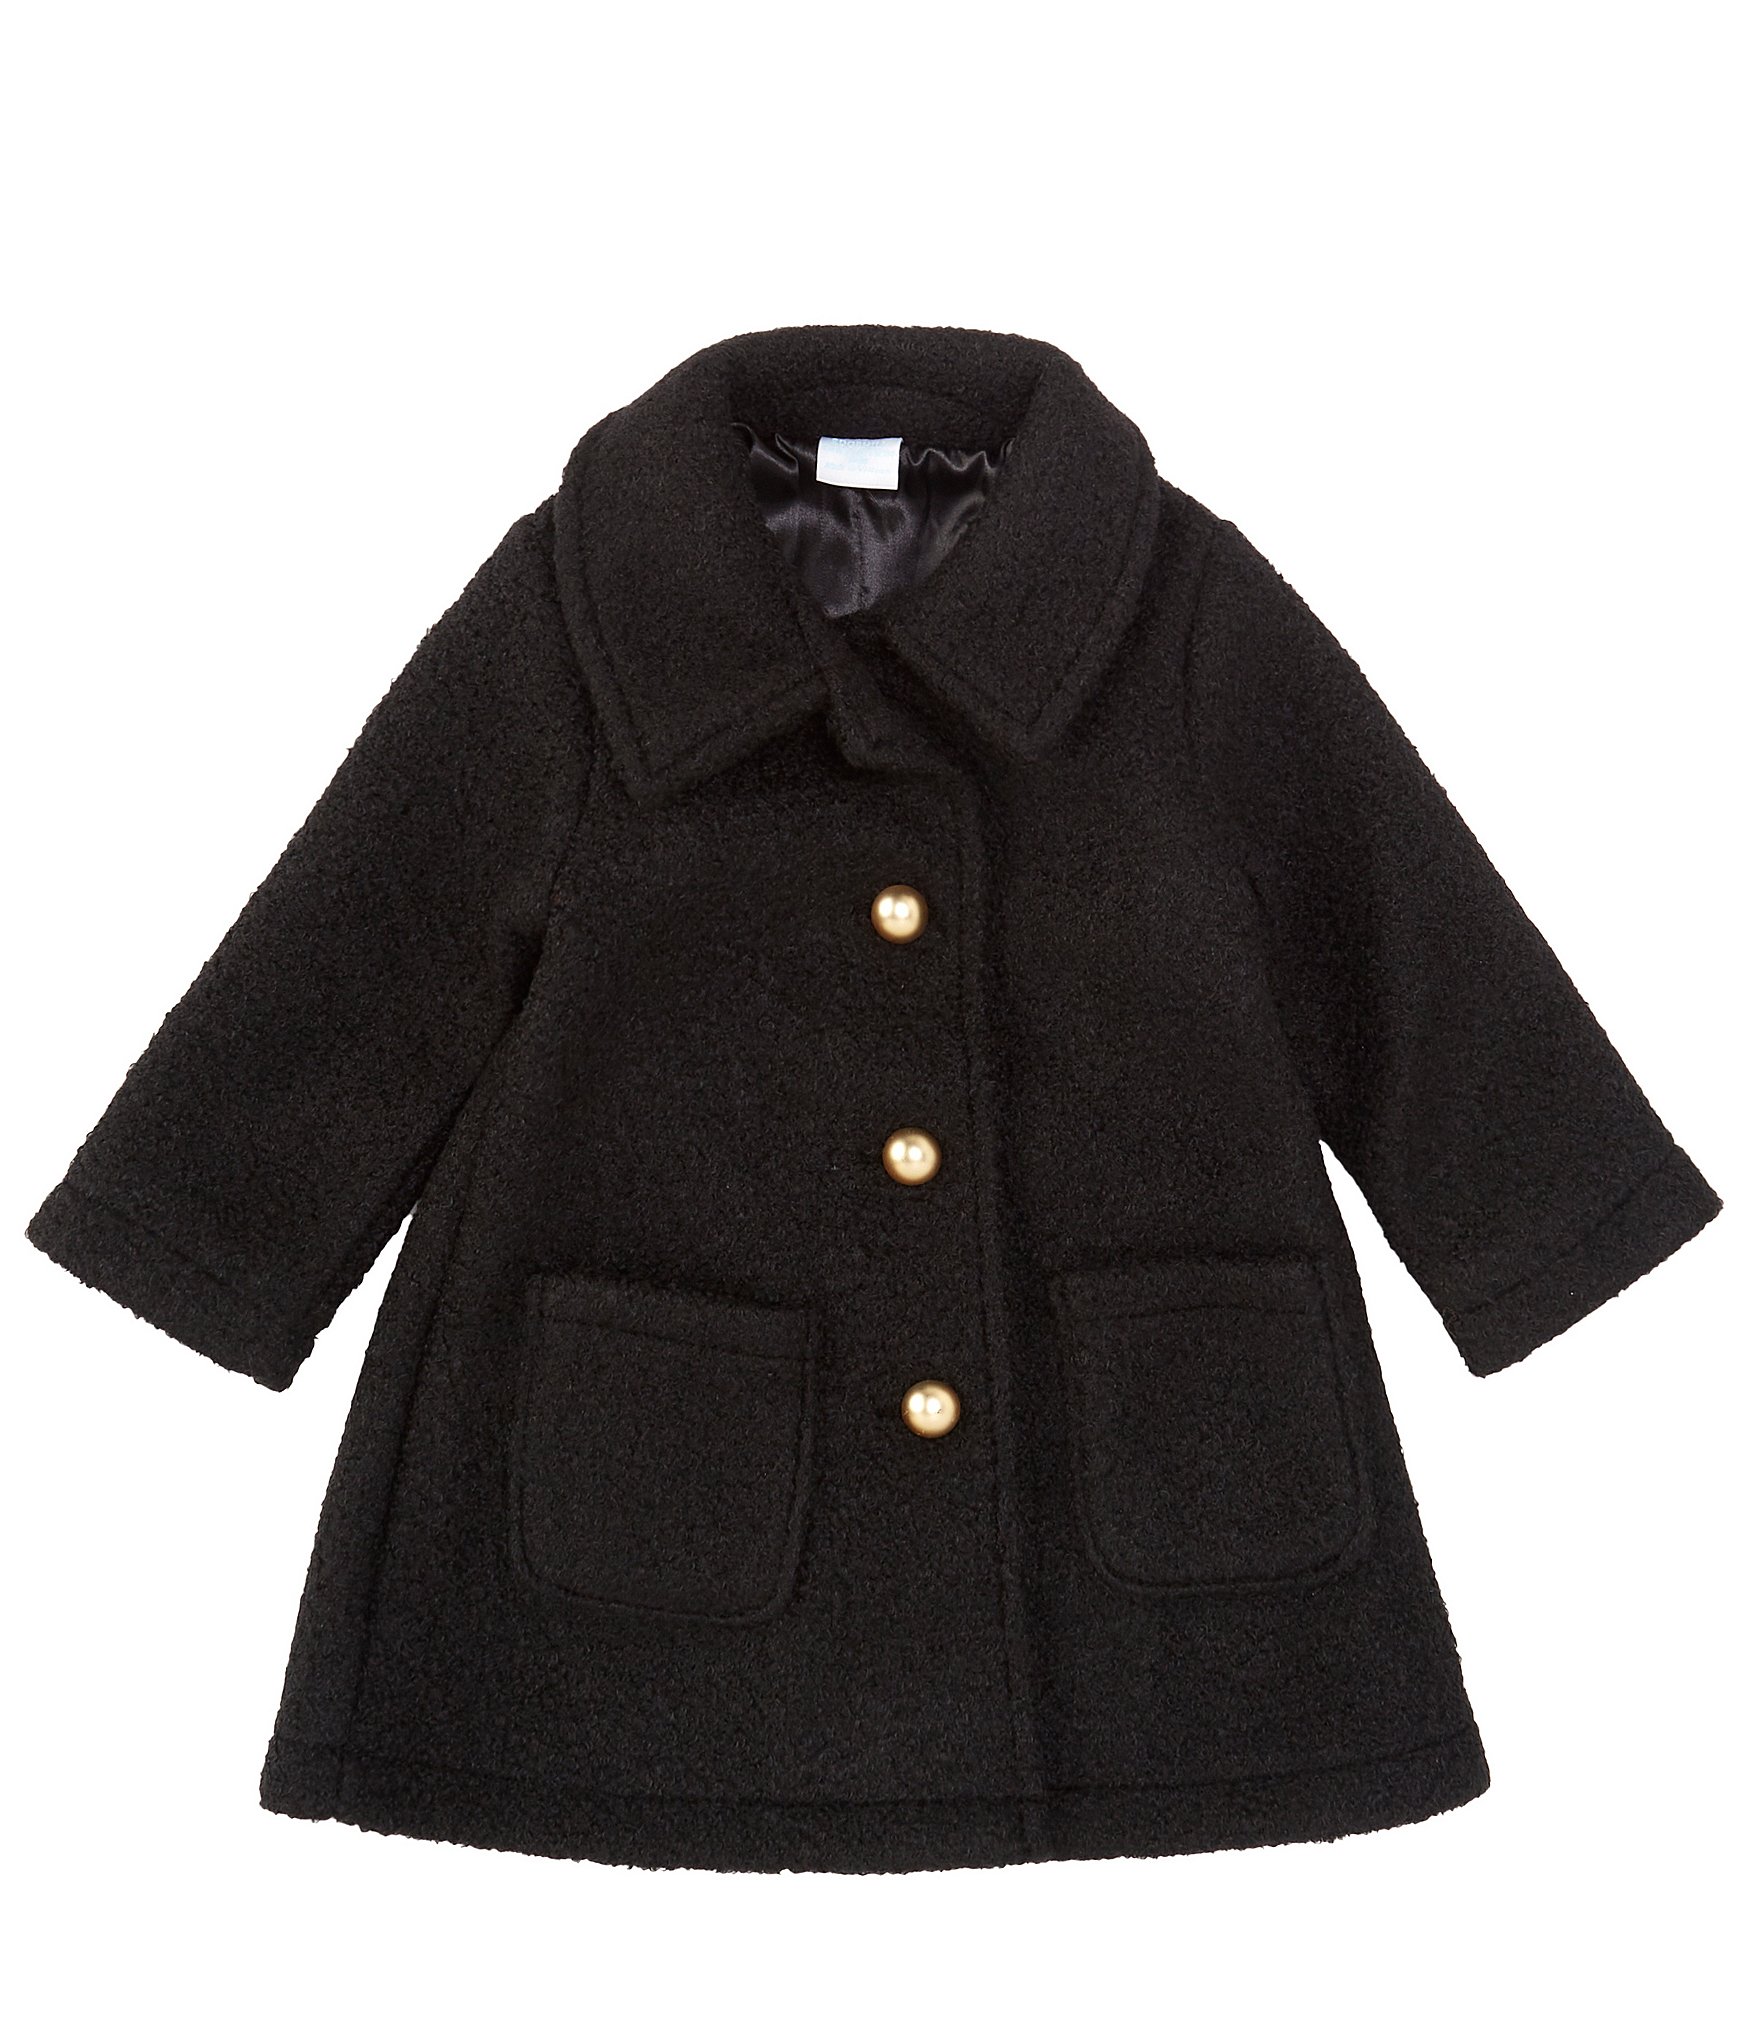 Edgehill Collection Baby Girl 12-24 Months Button Front Dress Coat ...